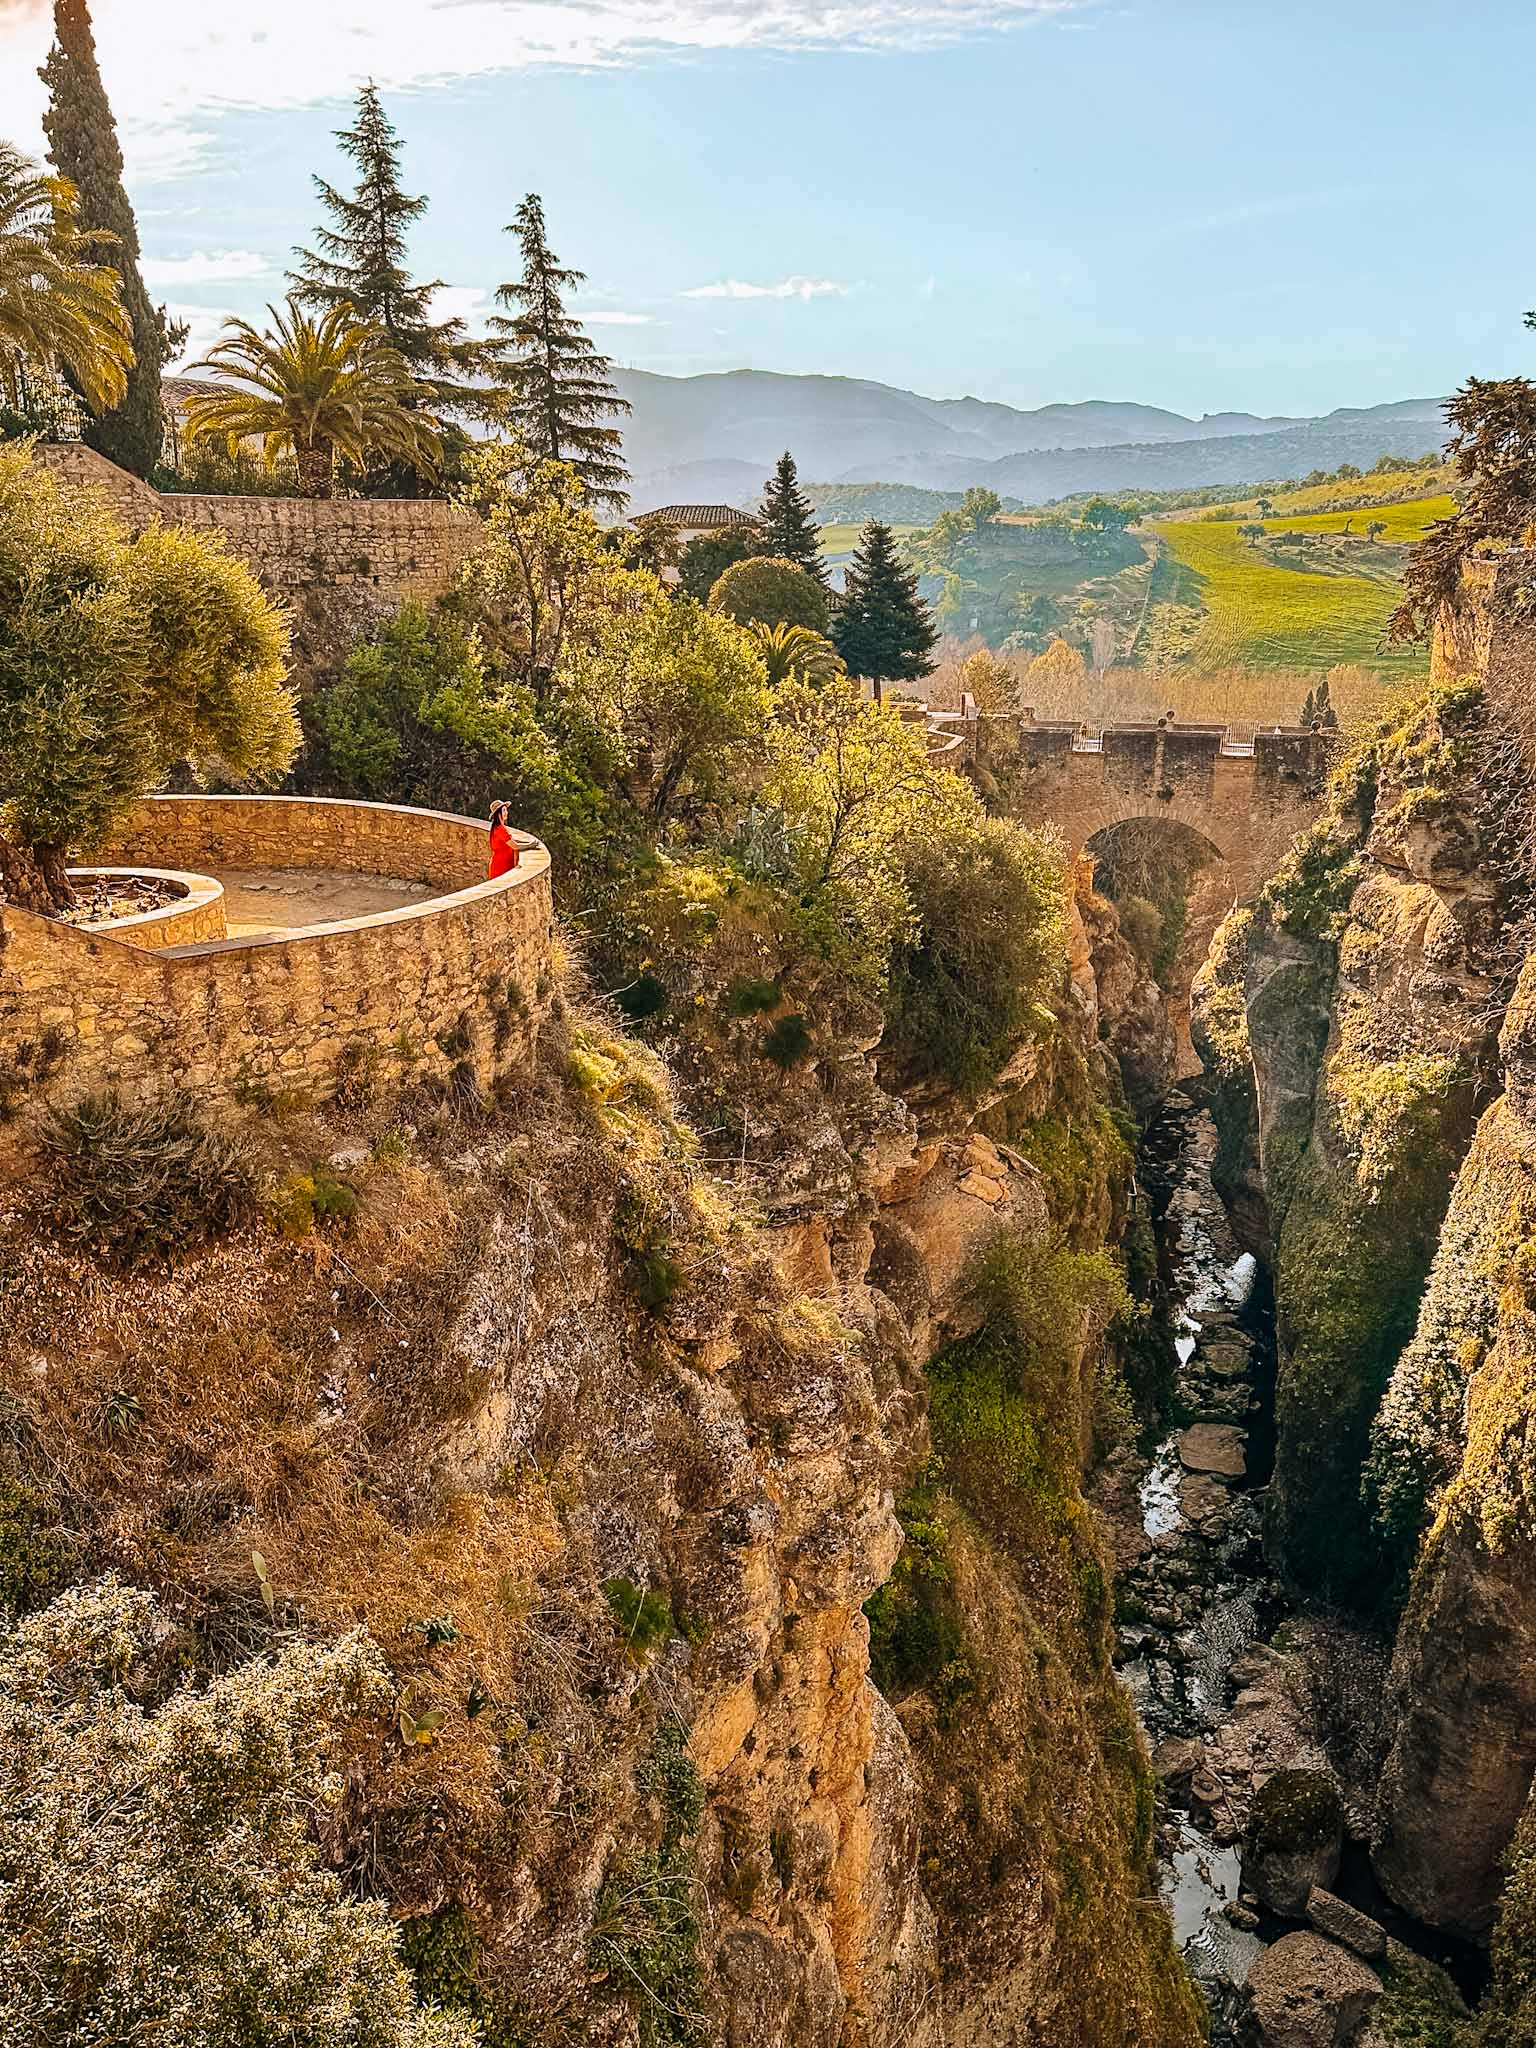 Hidden gems and unique things to see in Ronda, Spain